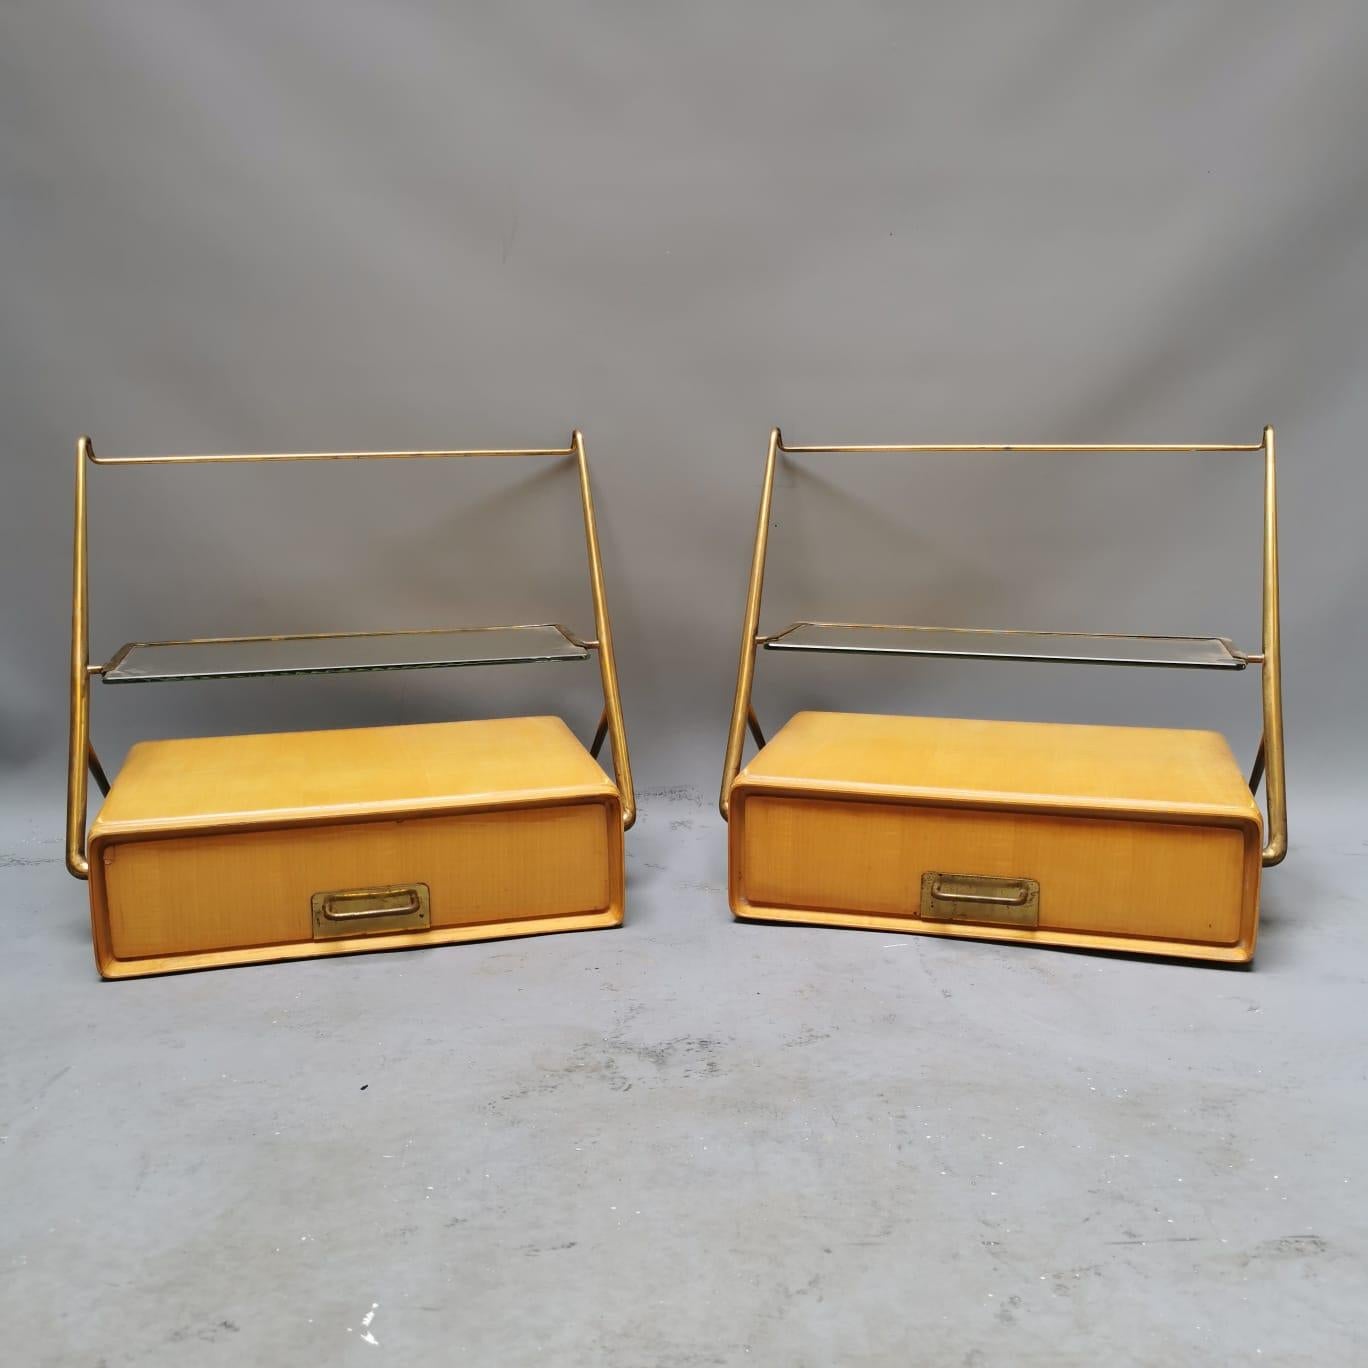 These two bedside represents the perfect e a,ple of great mid-century Italian design. The brass details are incredible and the glass, in very good conditions, make this item so really interesting. These two bedsides are made to be fixed on the wall.